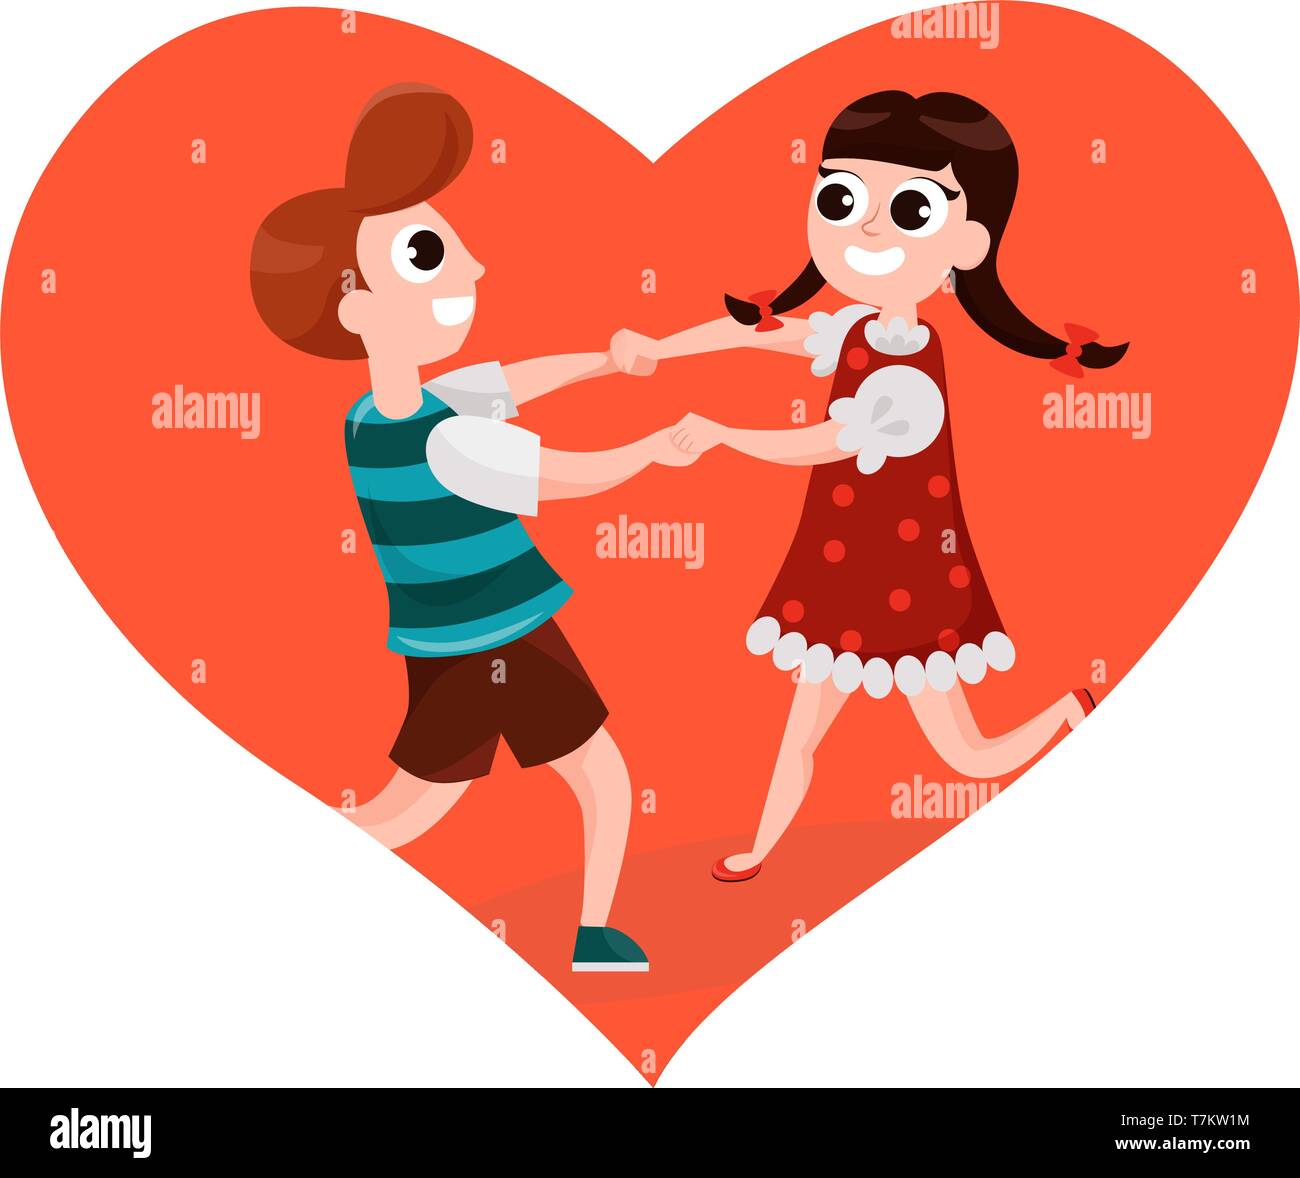 Boy and a girl playing in big heart flat style vector illustration isolated on white background Stock Vector